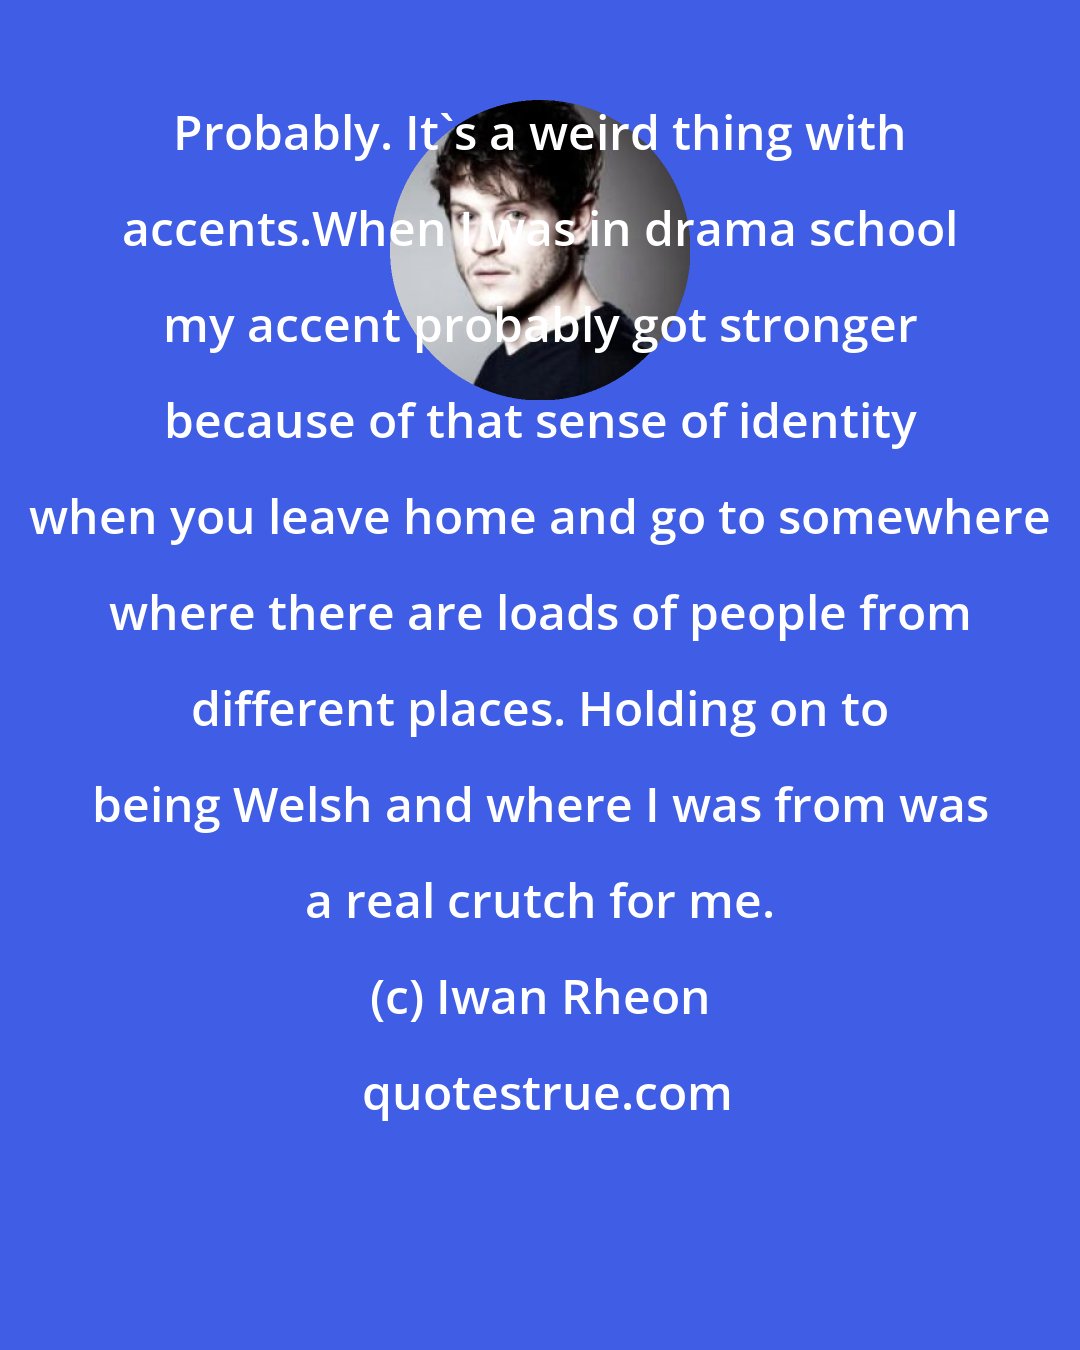 Iwan Rheon: Probably. It's a weird thing with accents.When I was in drama school my accent probably got stronger because of that sense of identity when you leave home and go to somewhere where there are loads of people from different places. Holding on to being Welsh and where I was from was a real crutch for me.